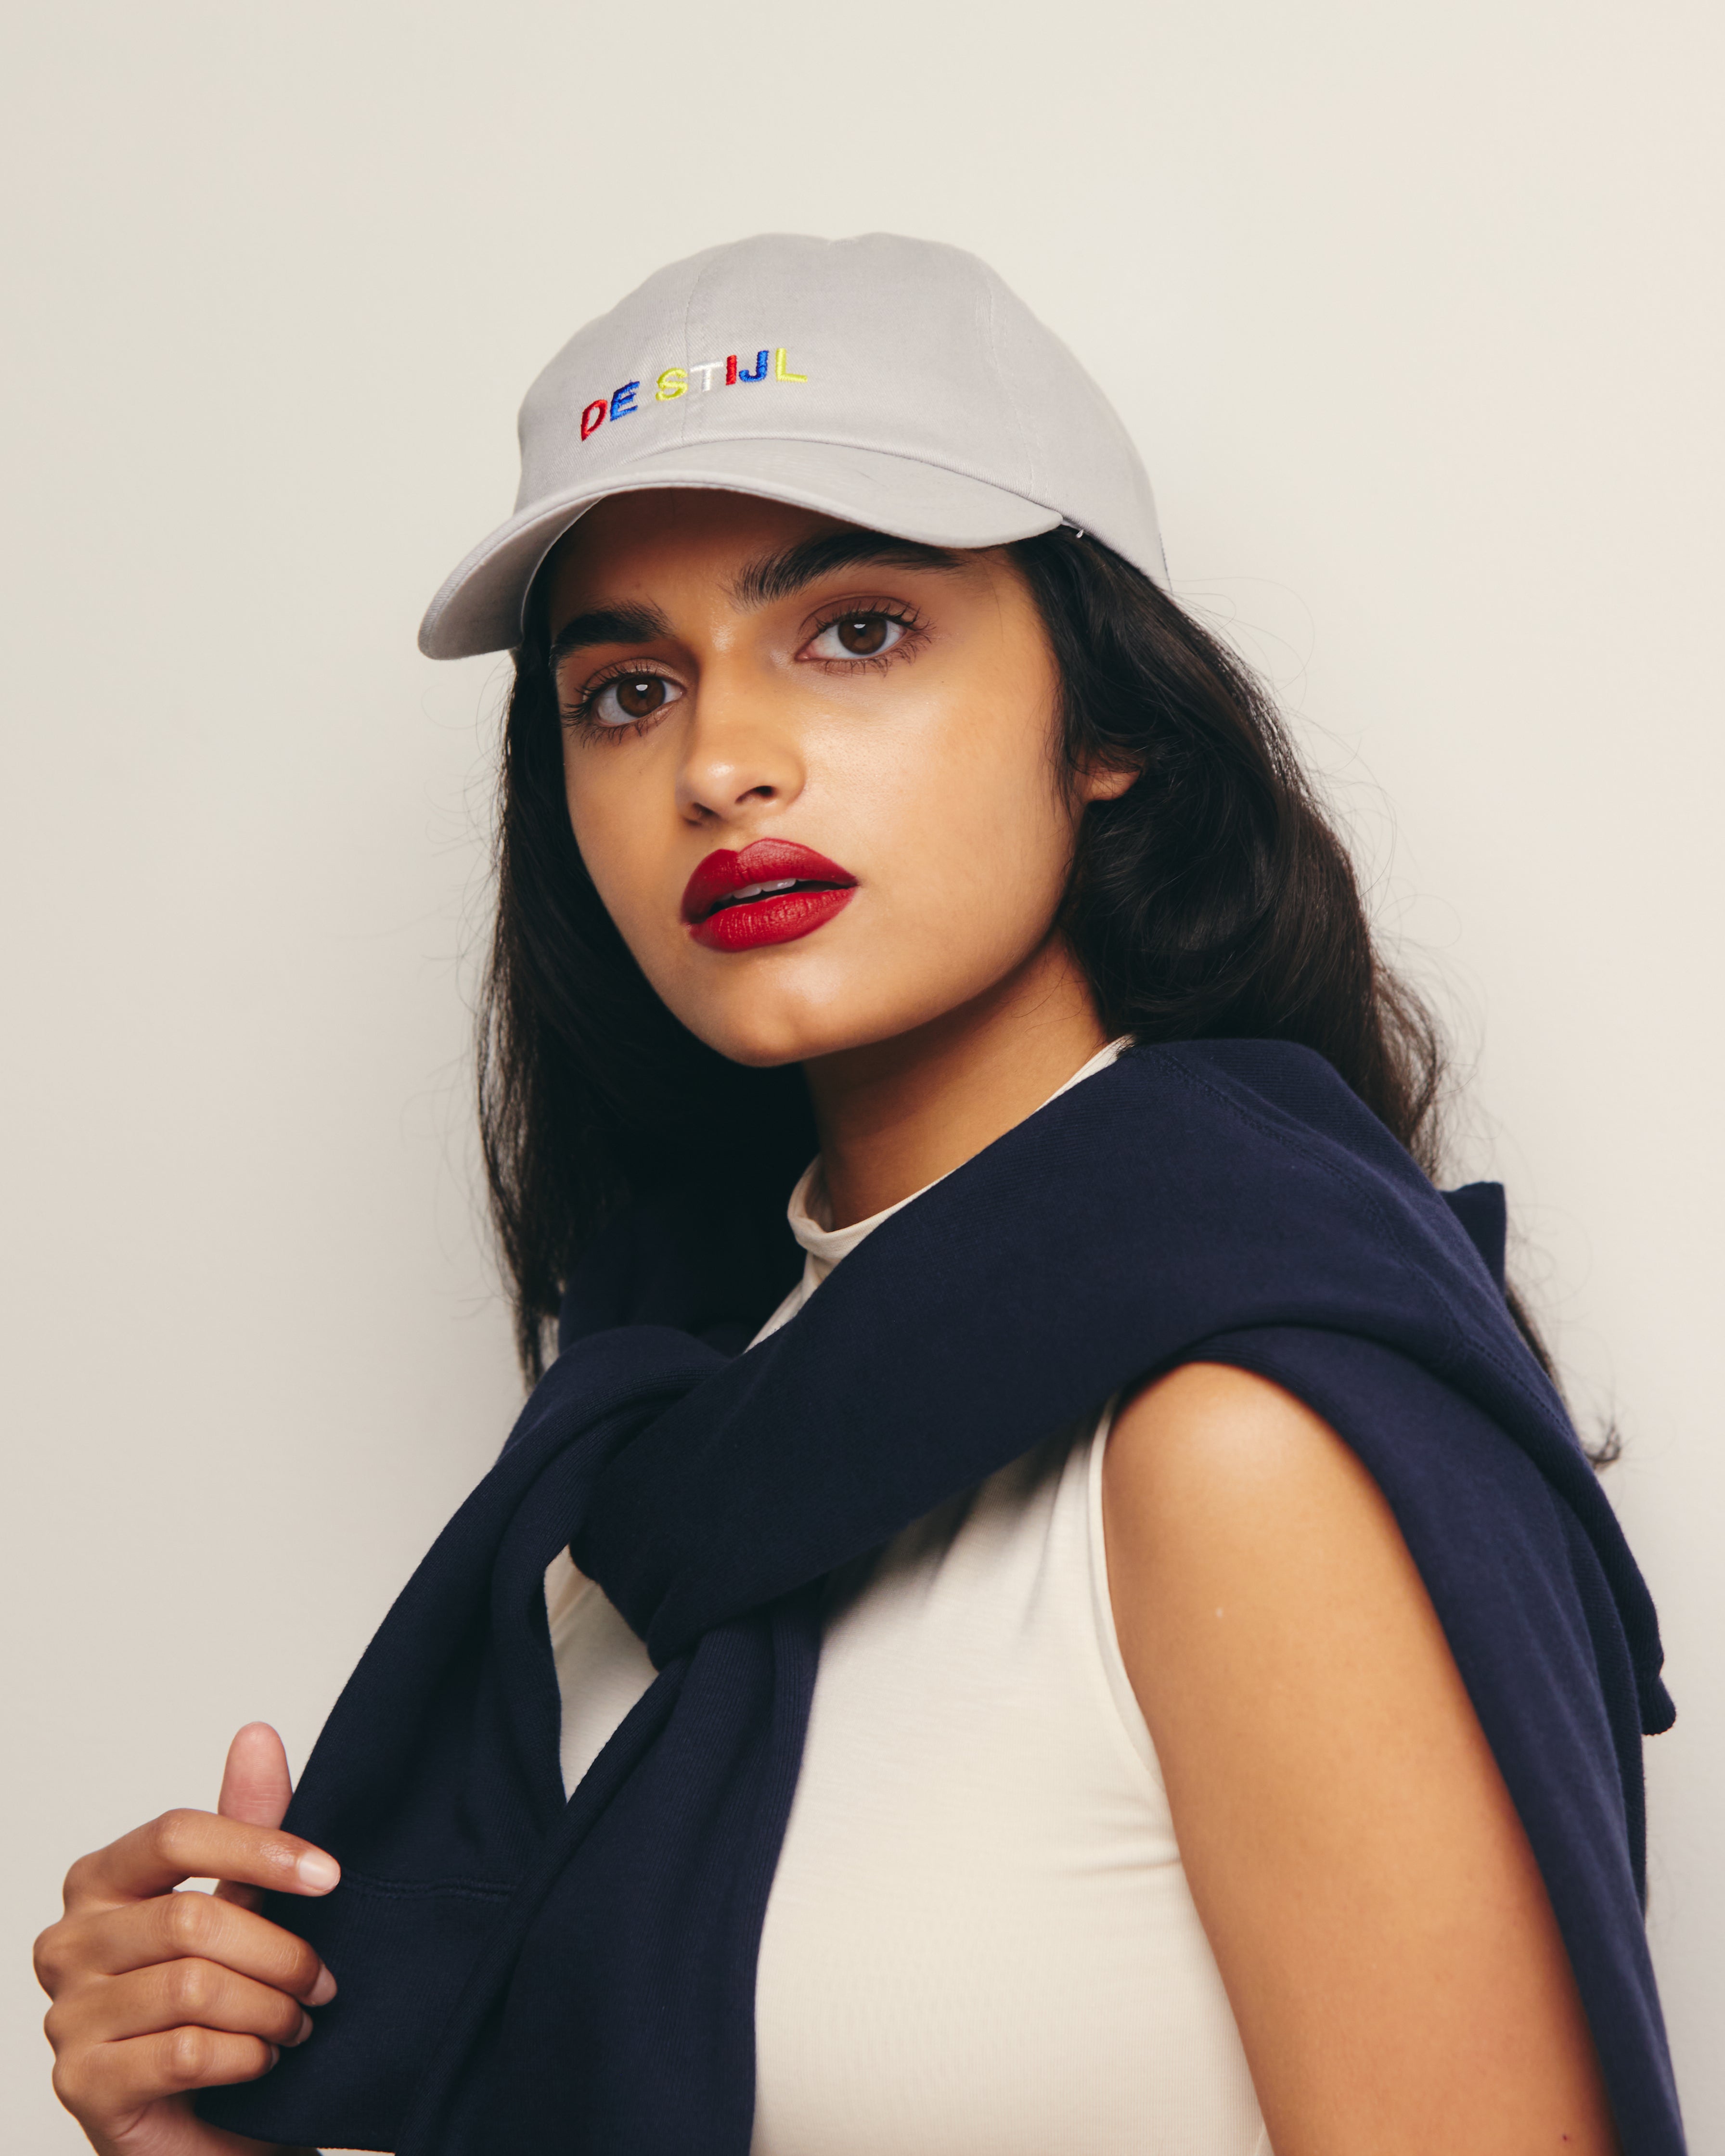 Mira Bhat wears Gray Baseball Cap / Dad Hat with De Stijl Art Movement Text Embroidery on Front. 100% Cotton.